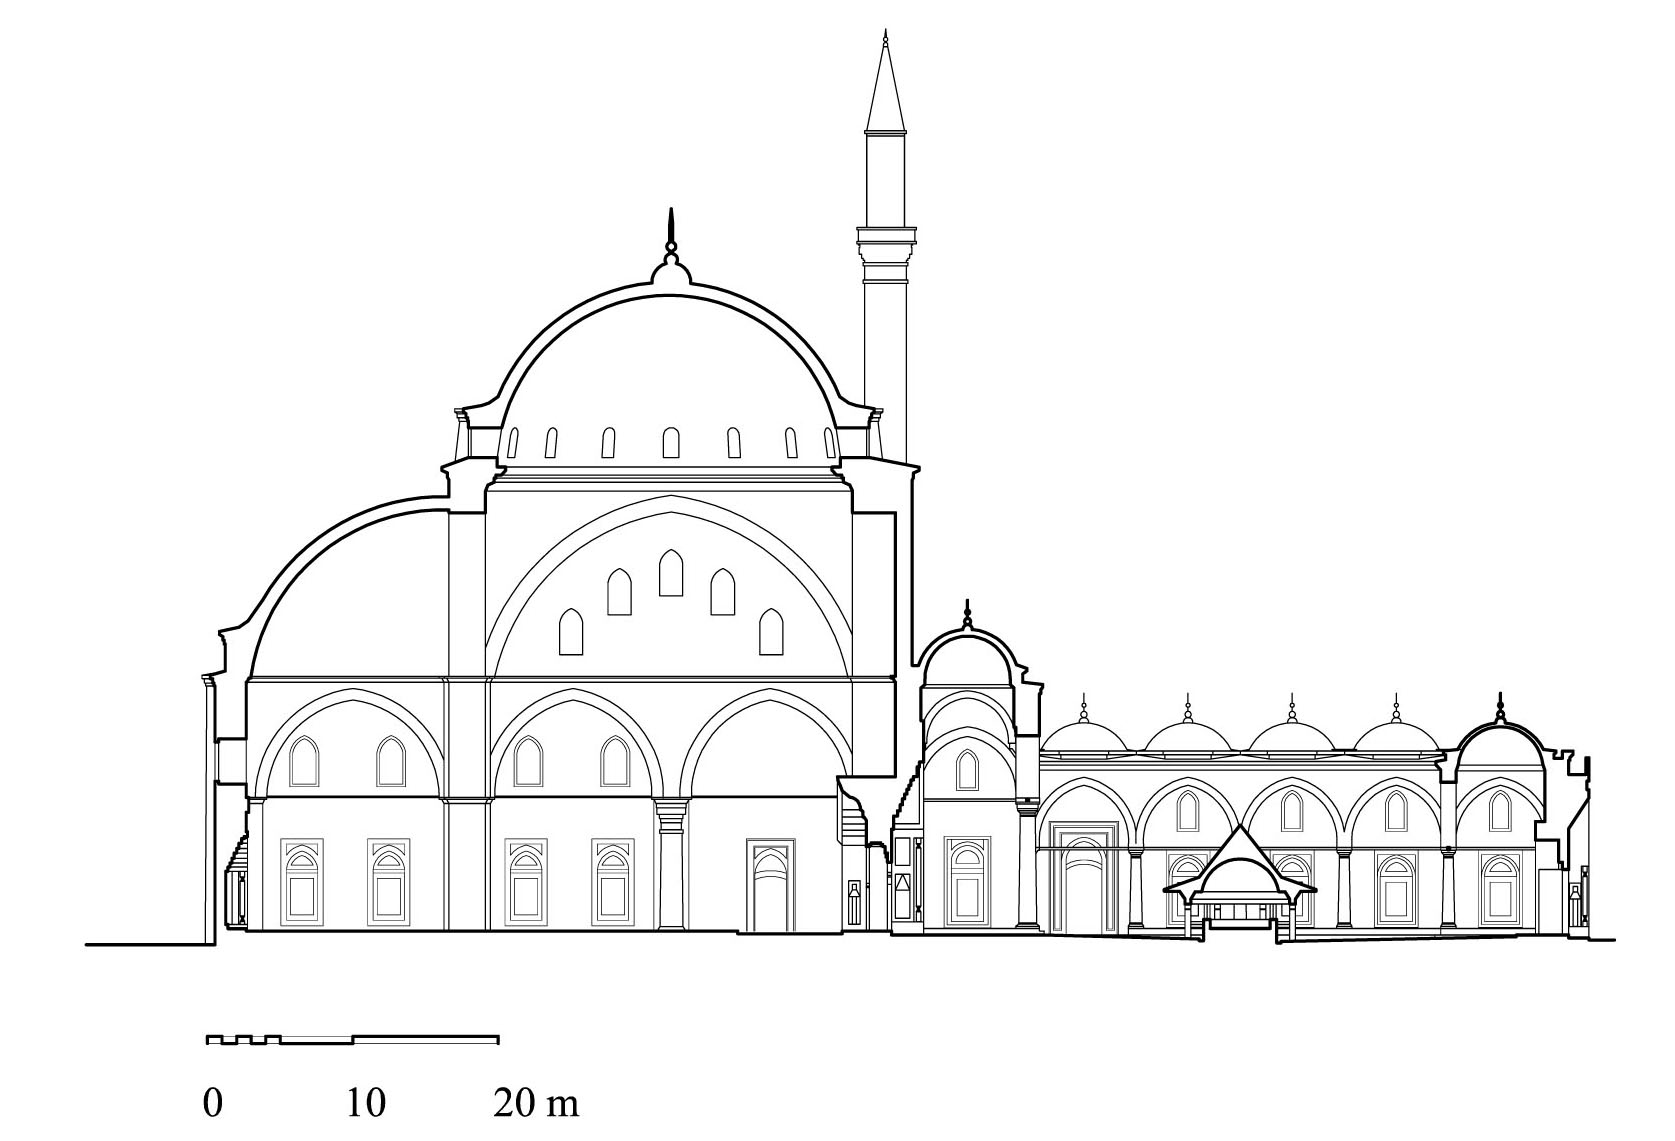 Fatih Camii - Hypothetical cross-section of the original mosque of Mehmed II